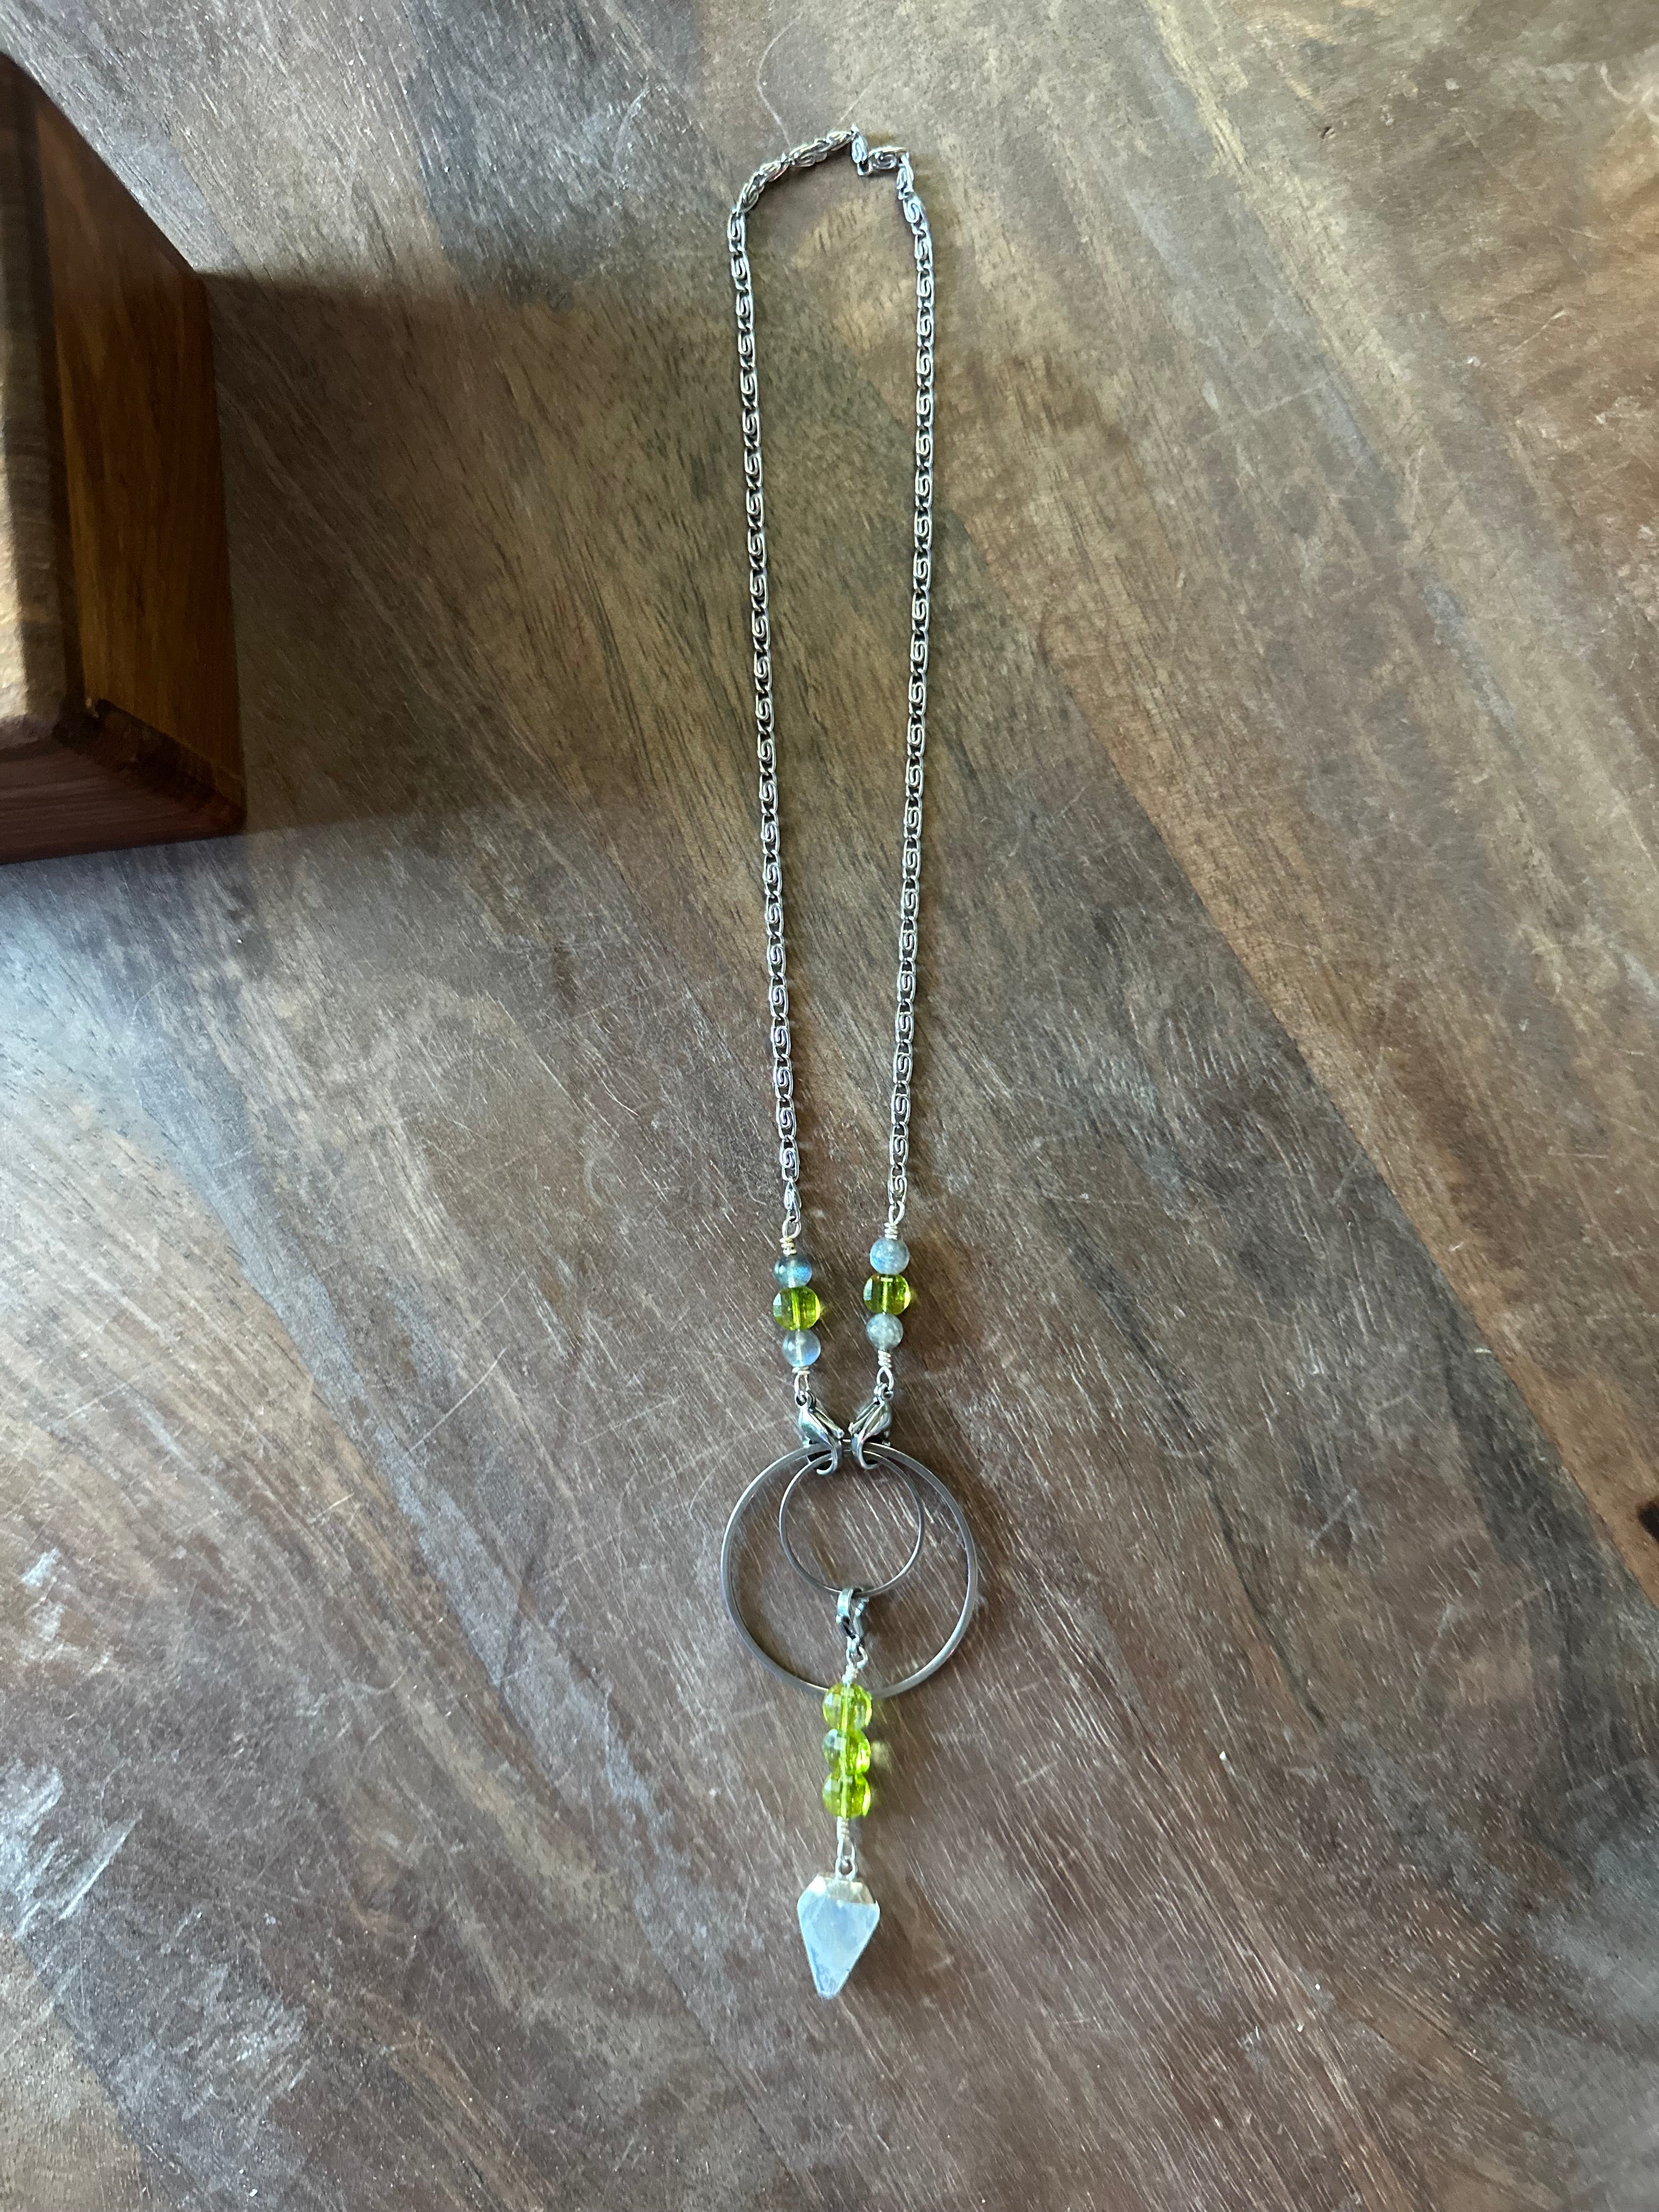 When not being worn as a body chain, this can be worn as a necklace (and styled multiple ways with the different connectors that are all included. The remaining unused portions can be worn as an intricate hand chain paired with your necklace which is sure to spark conversation